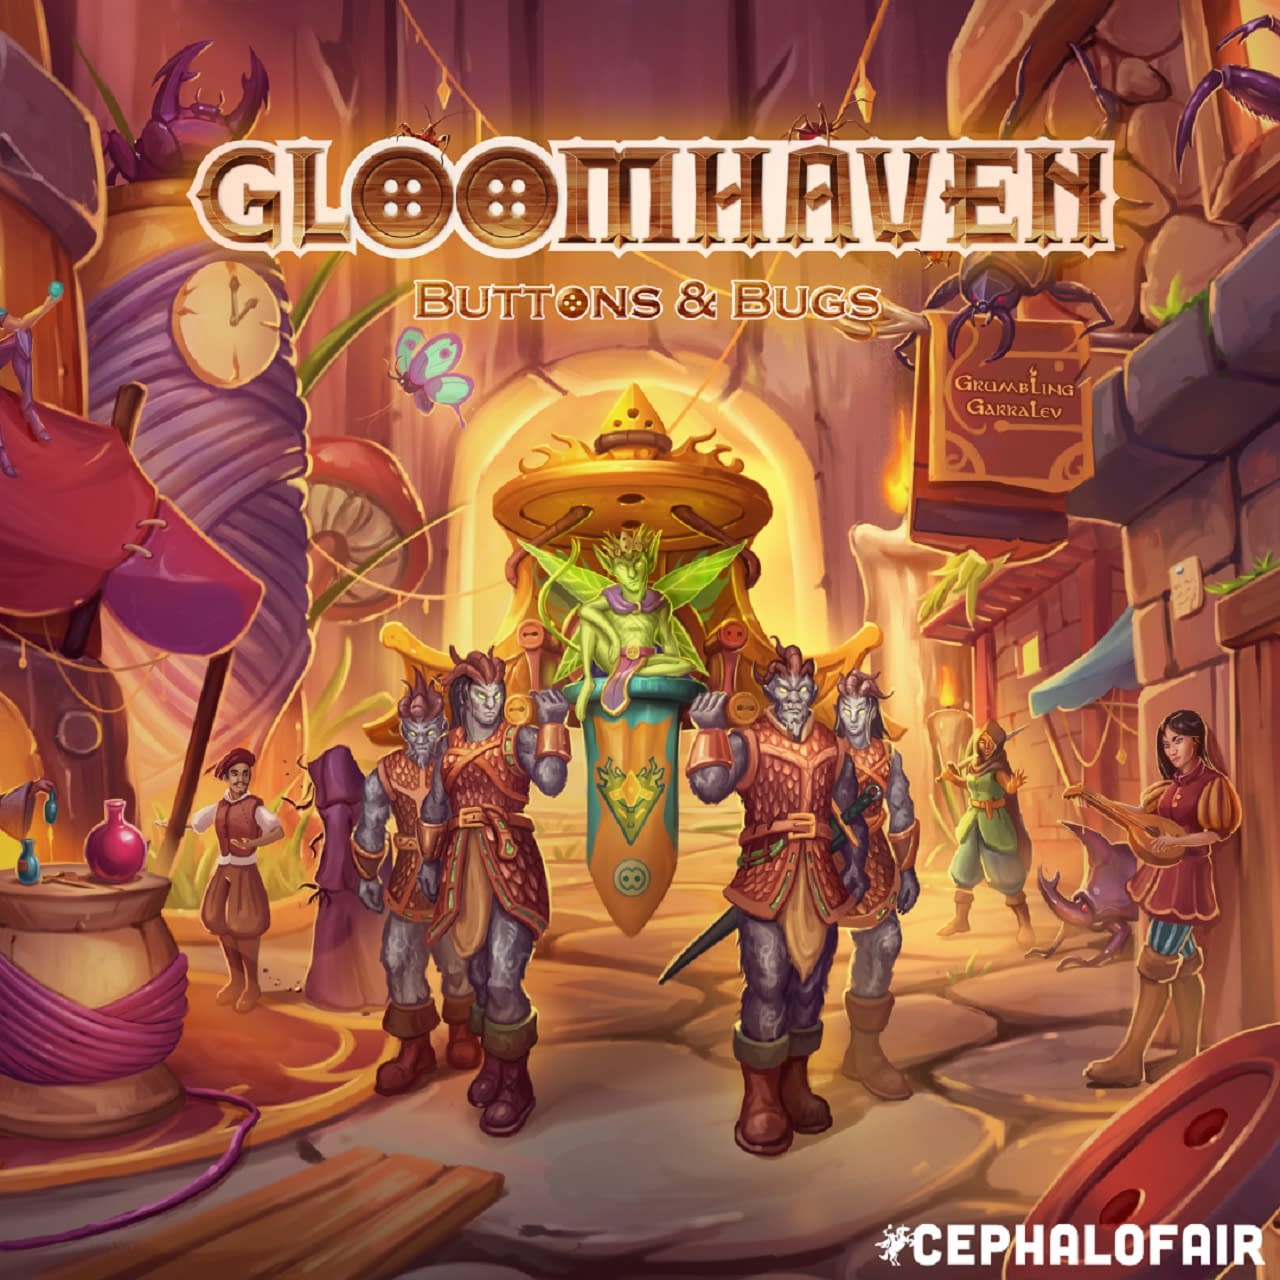 Gloomhaven Announces New Expansion Called Buttons & Bugs